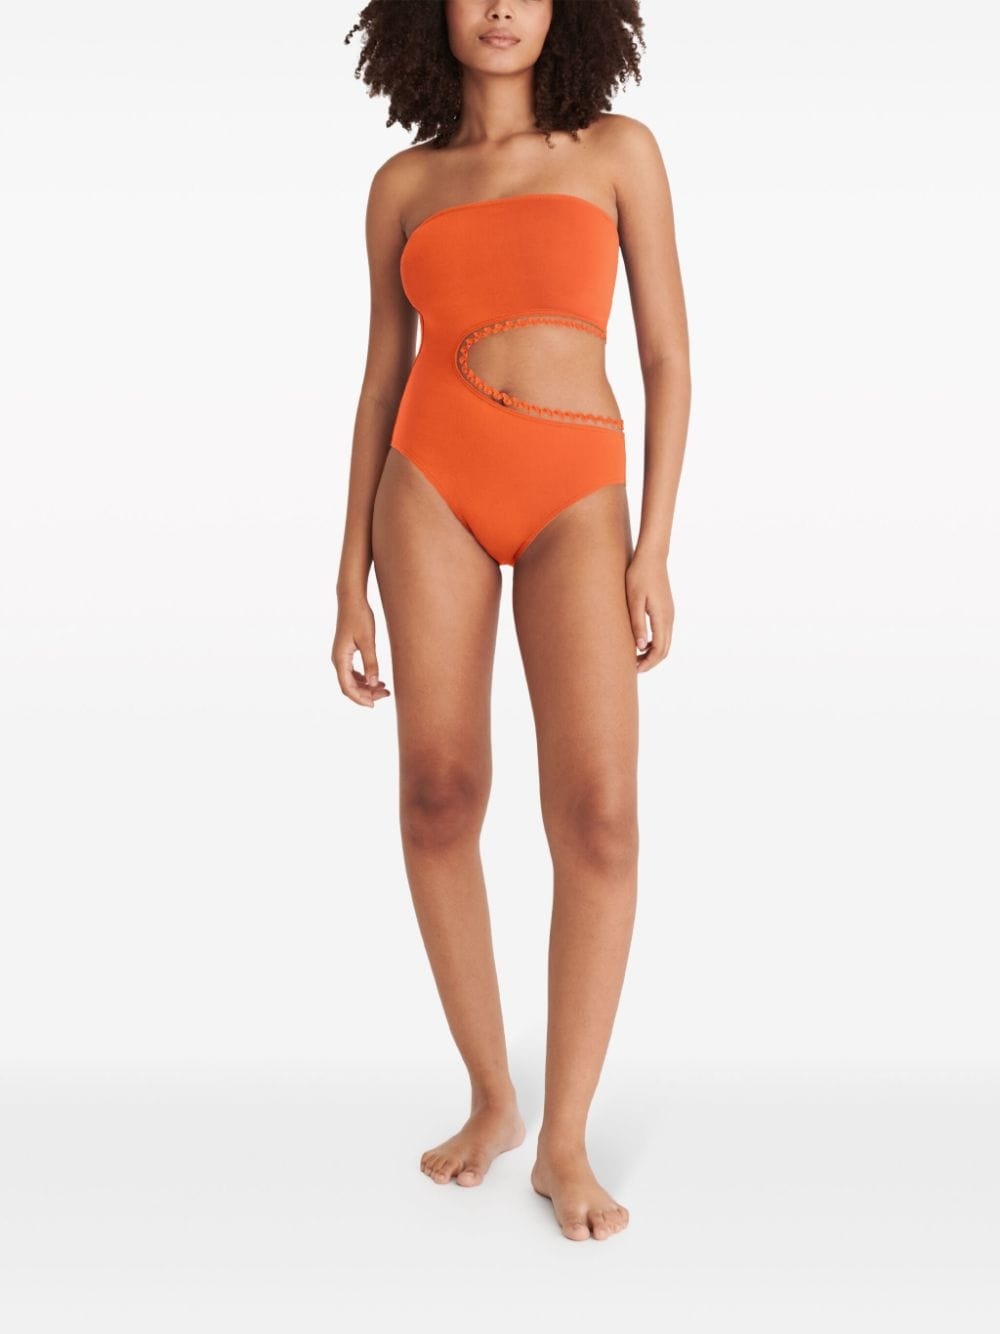 Dancing one-piece strapless swimsuit - 3